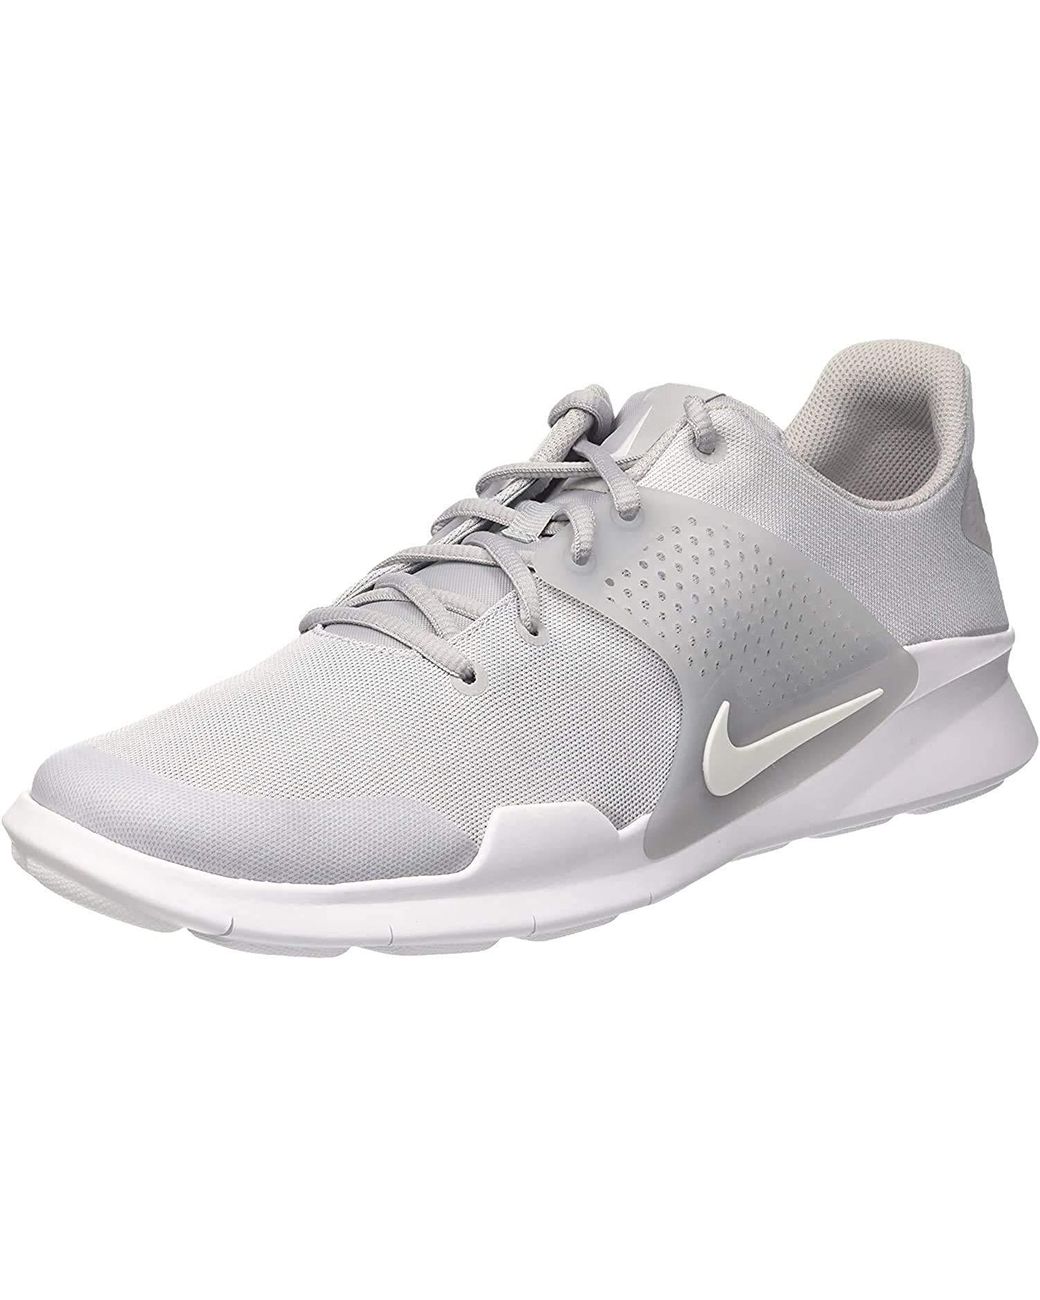 Nike Arrowz, Training Shoes in Grey (Gray) for Men - Save 56% - Lyst